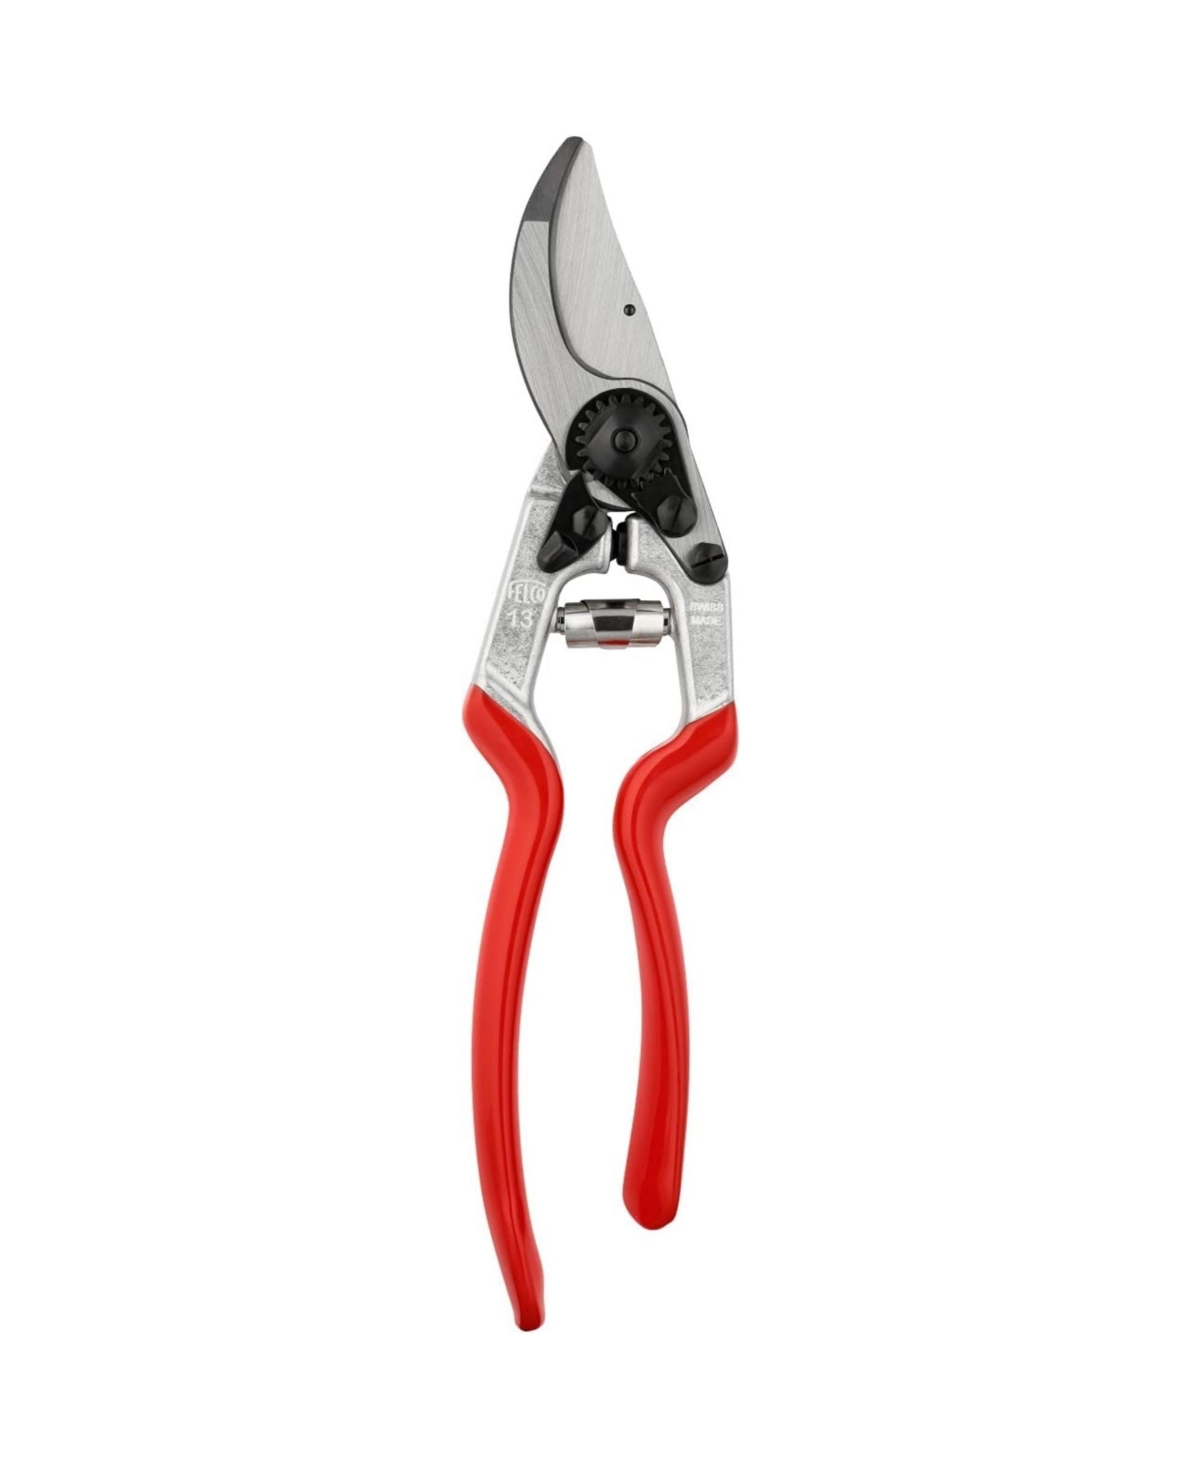 F13 One or Two-Hand Garden Pruner with Steel Blade - Multi